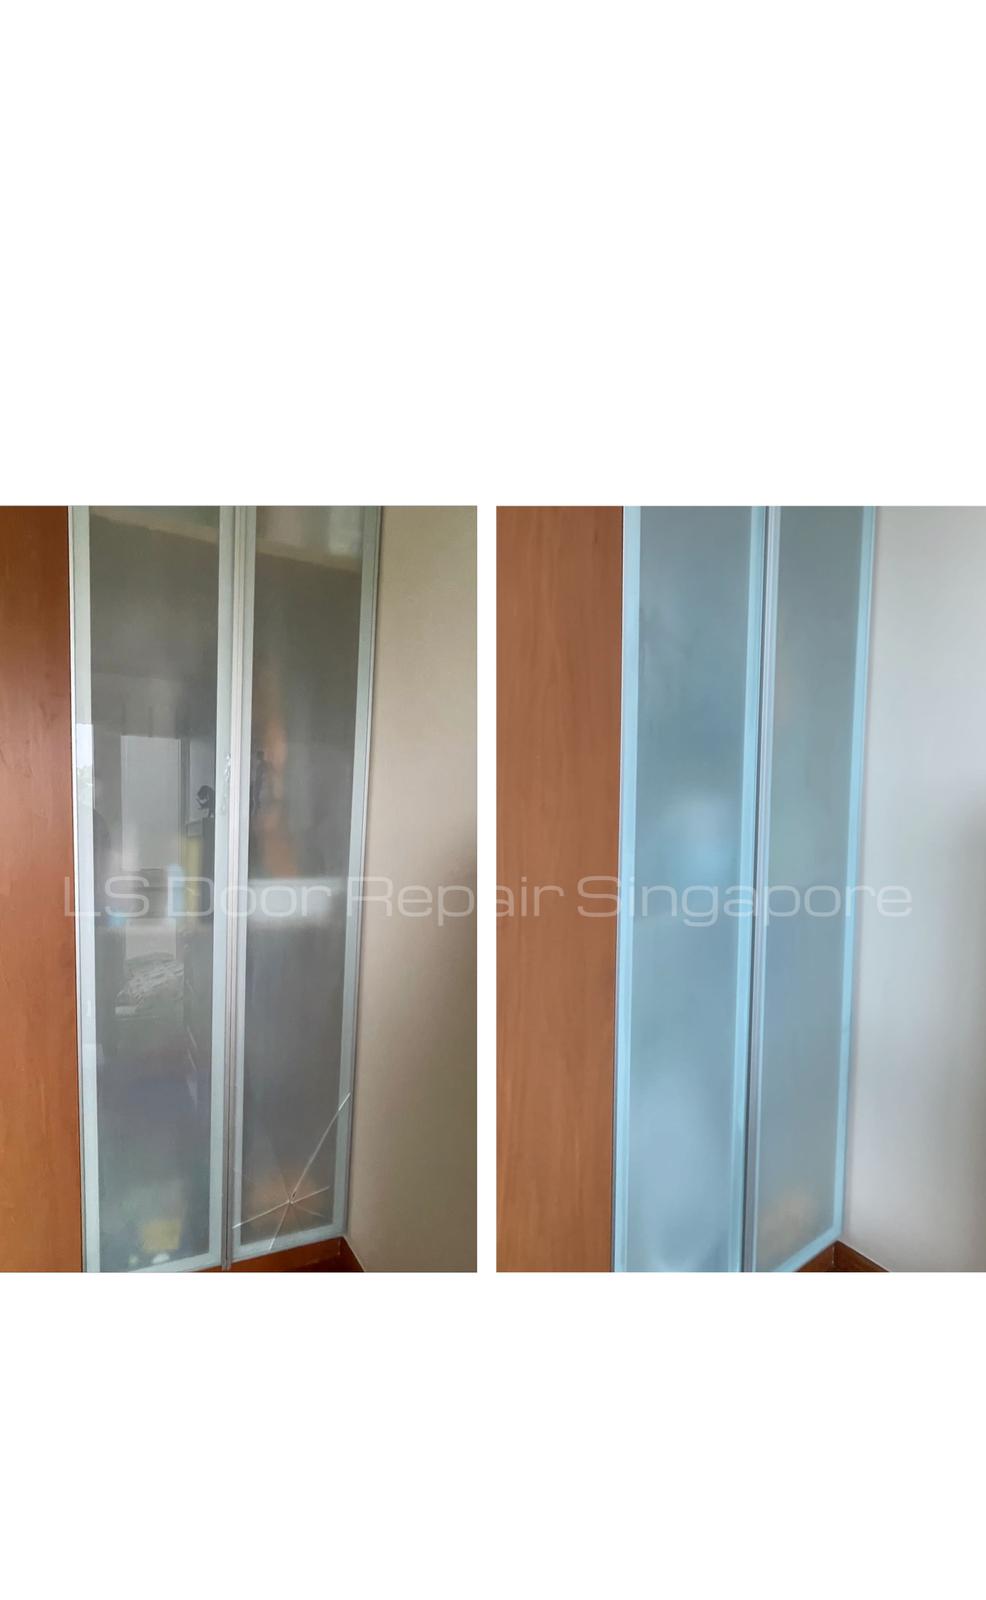 Supply And Replace Frosted Glass Panel